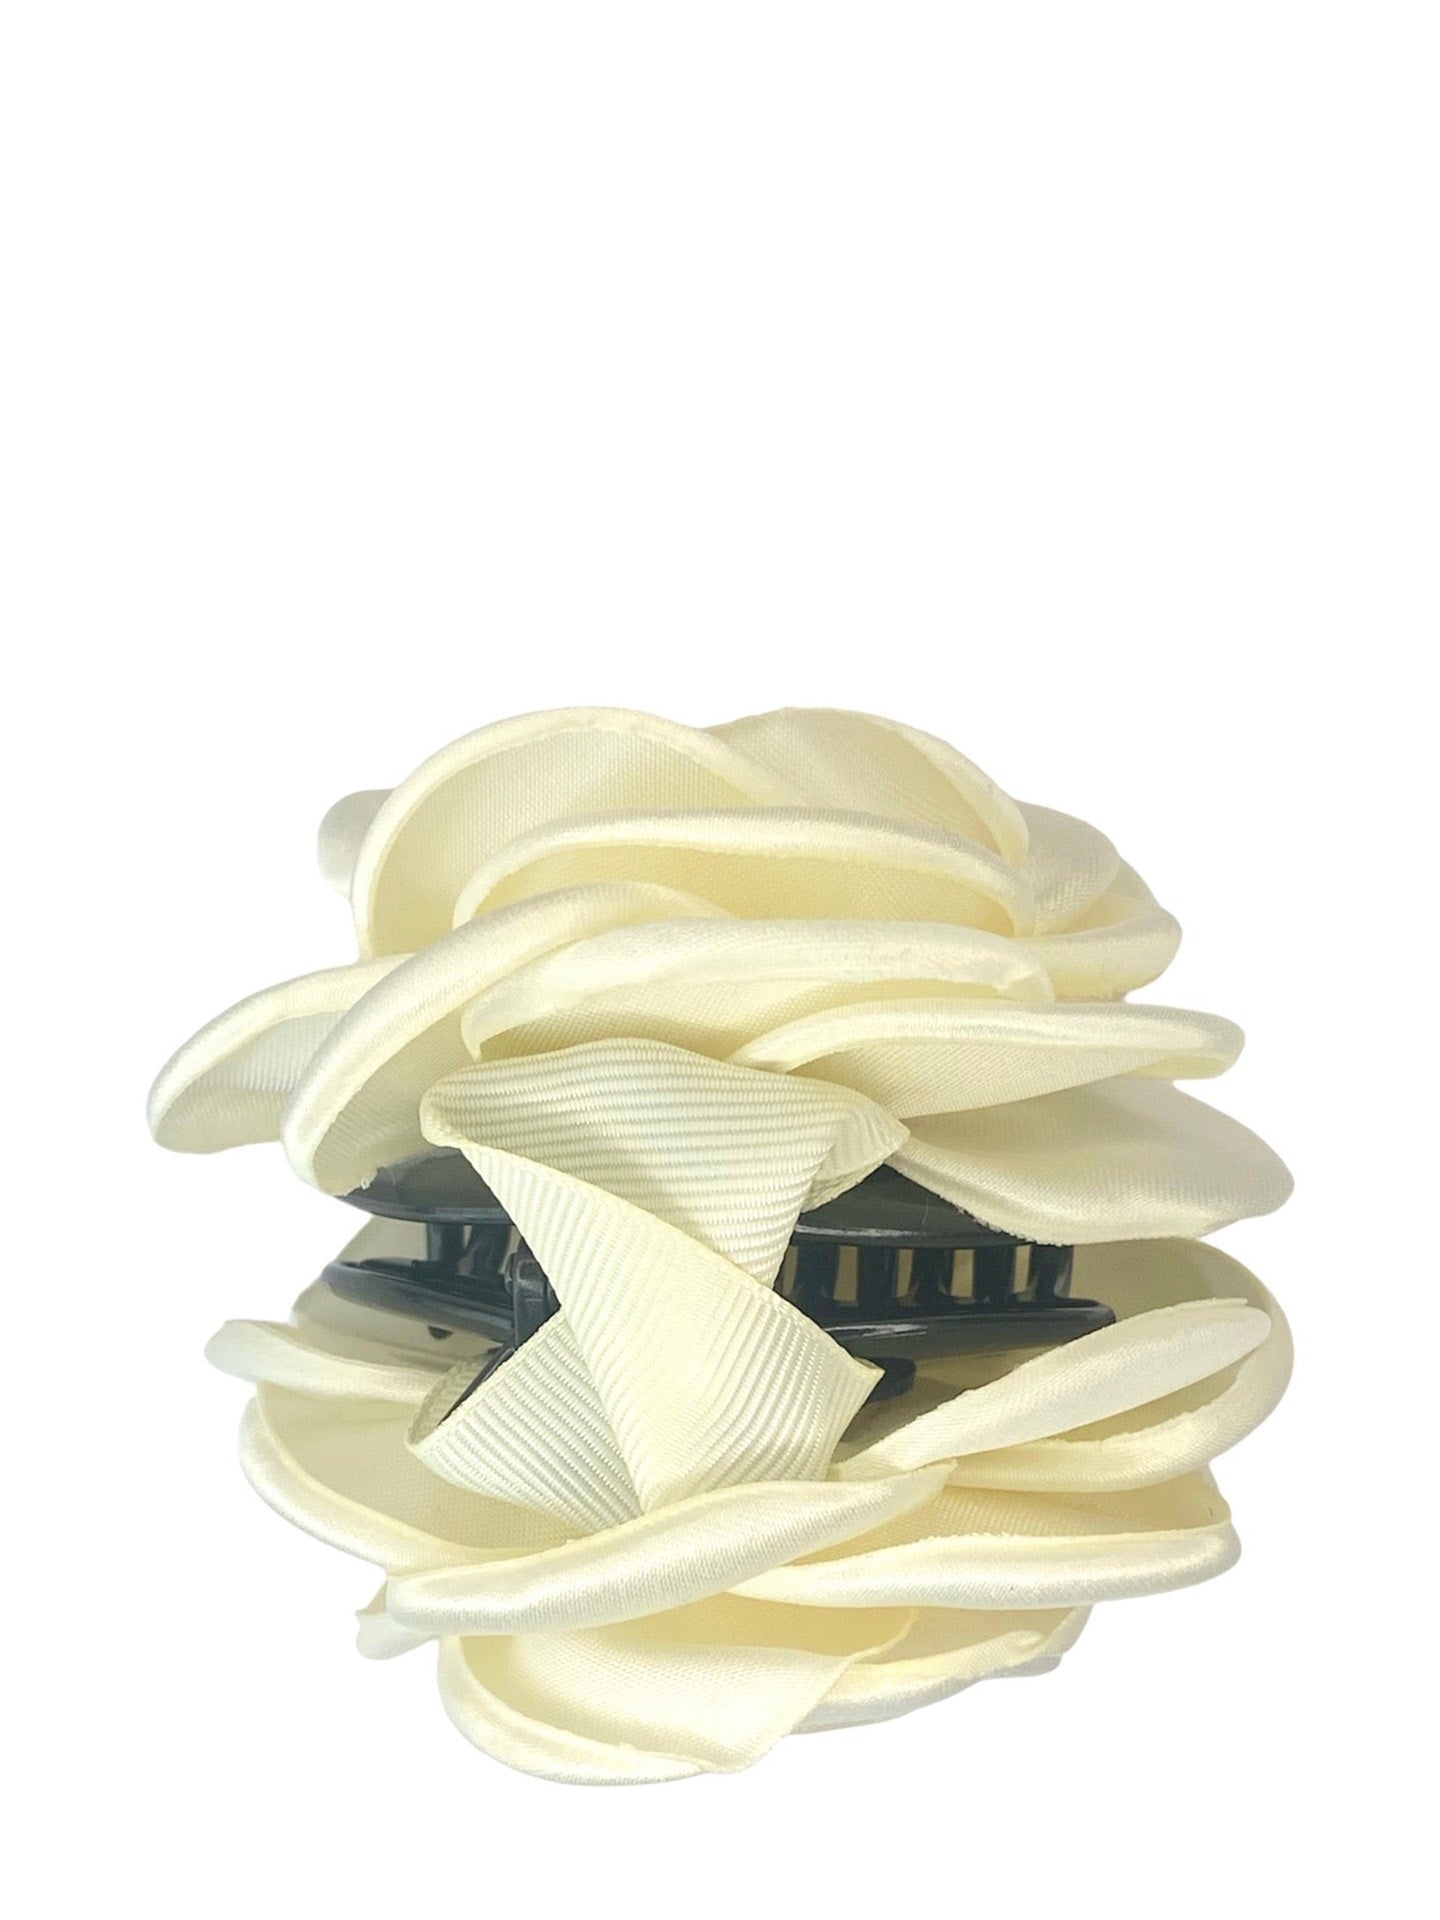 Small Satin Rose Claw, Ivory